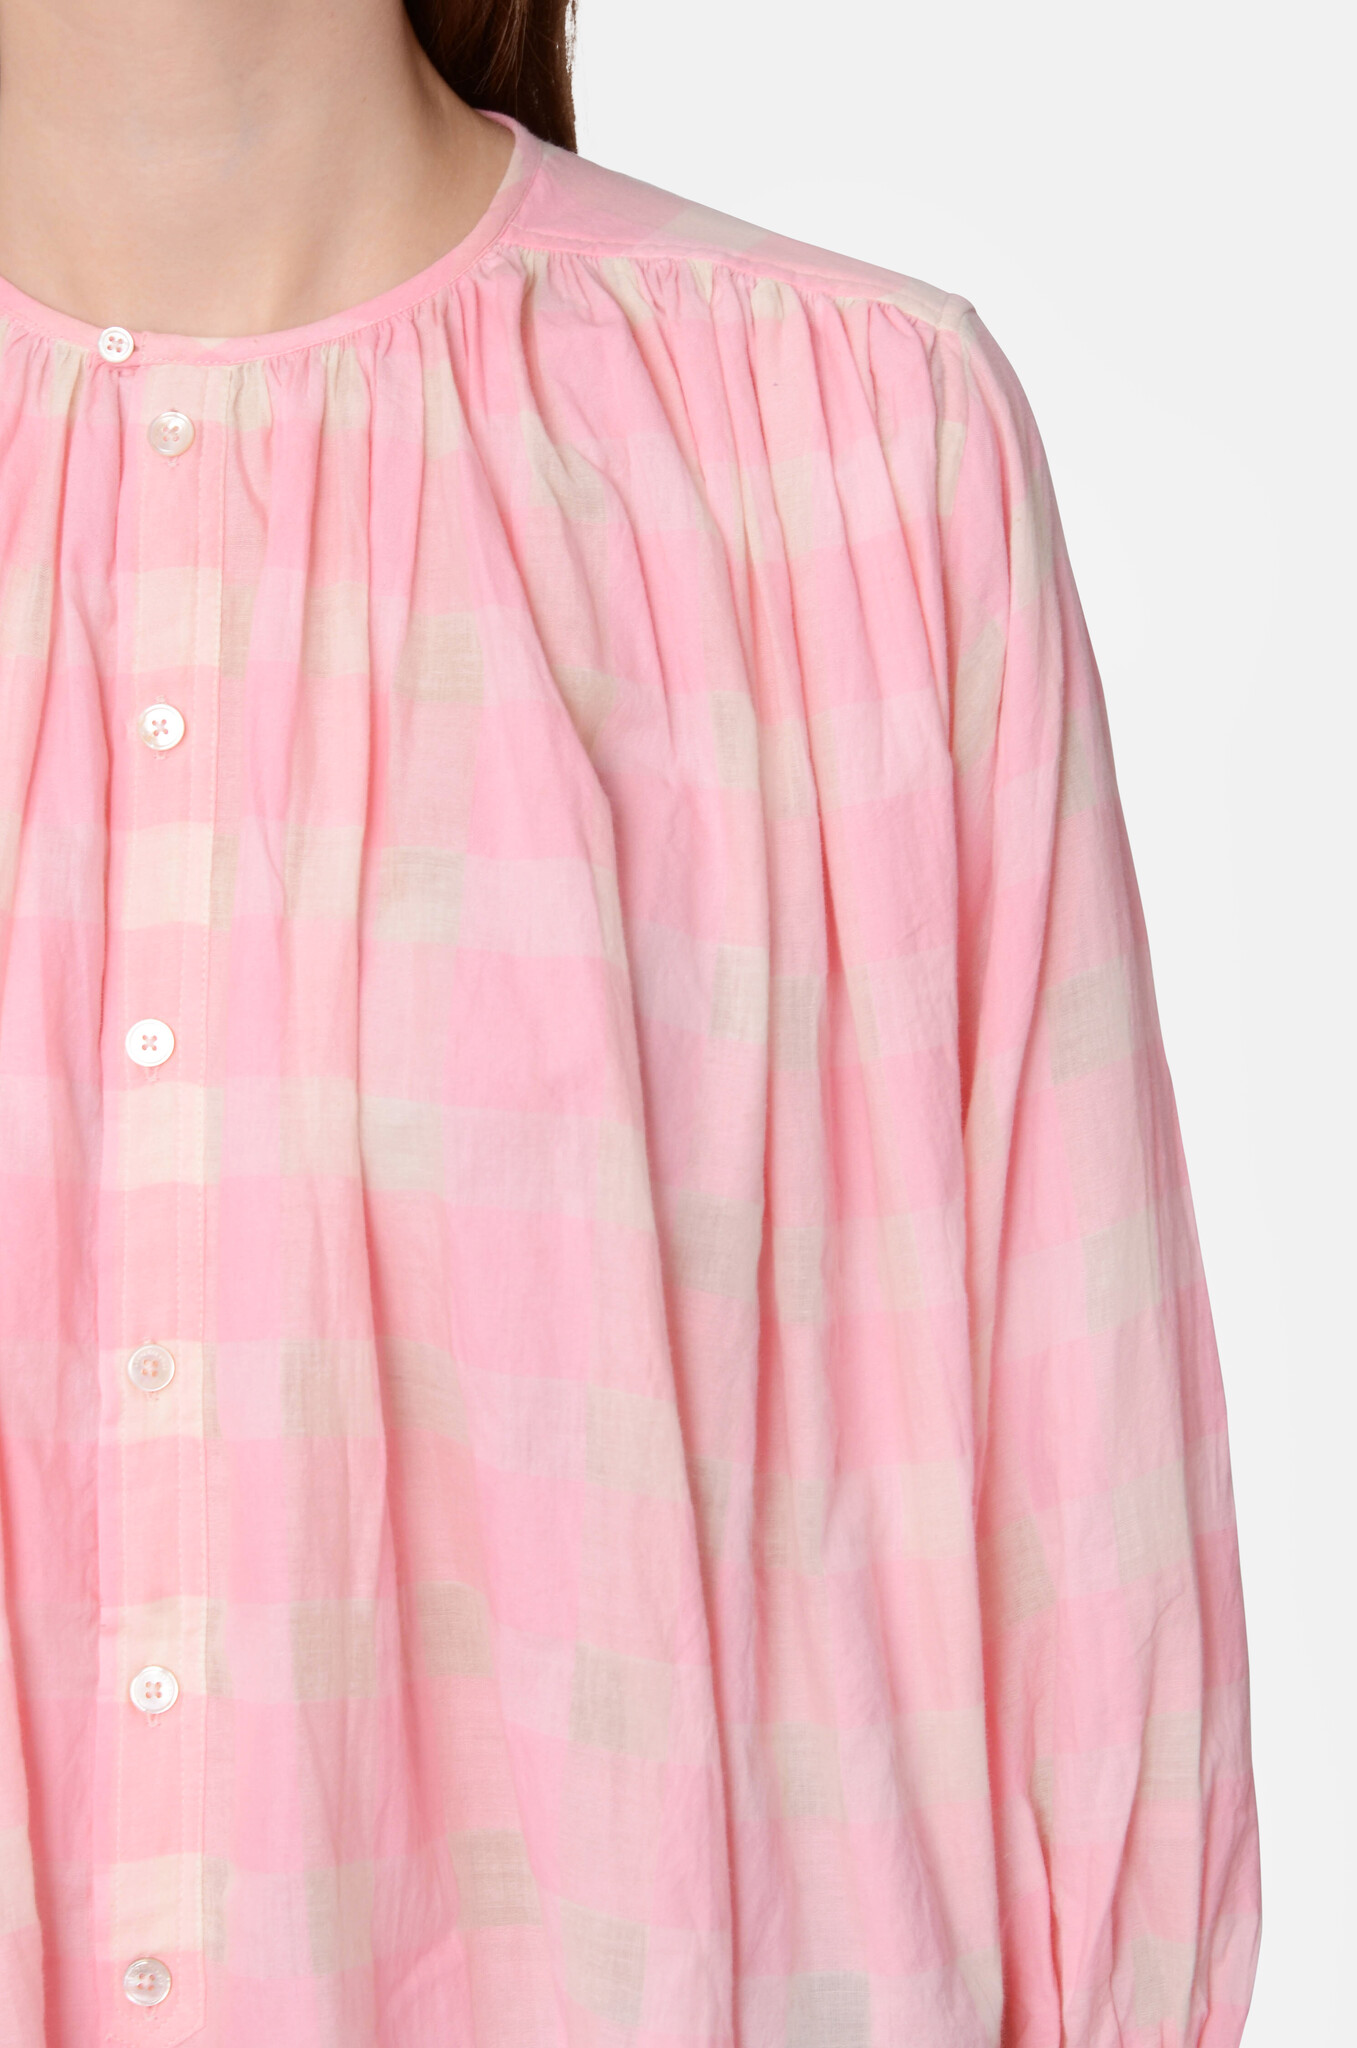 Cigarbox Blouse in Pink Gingham-5